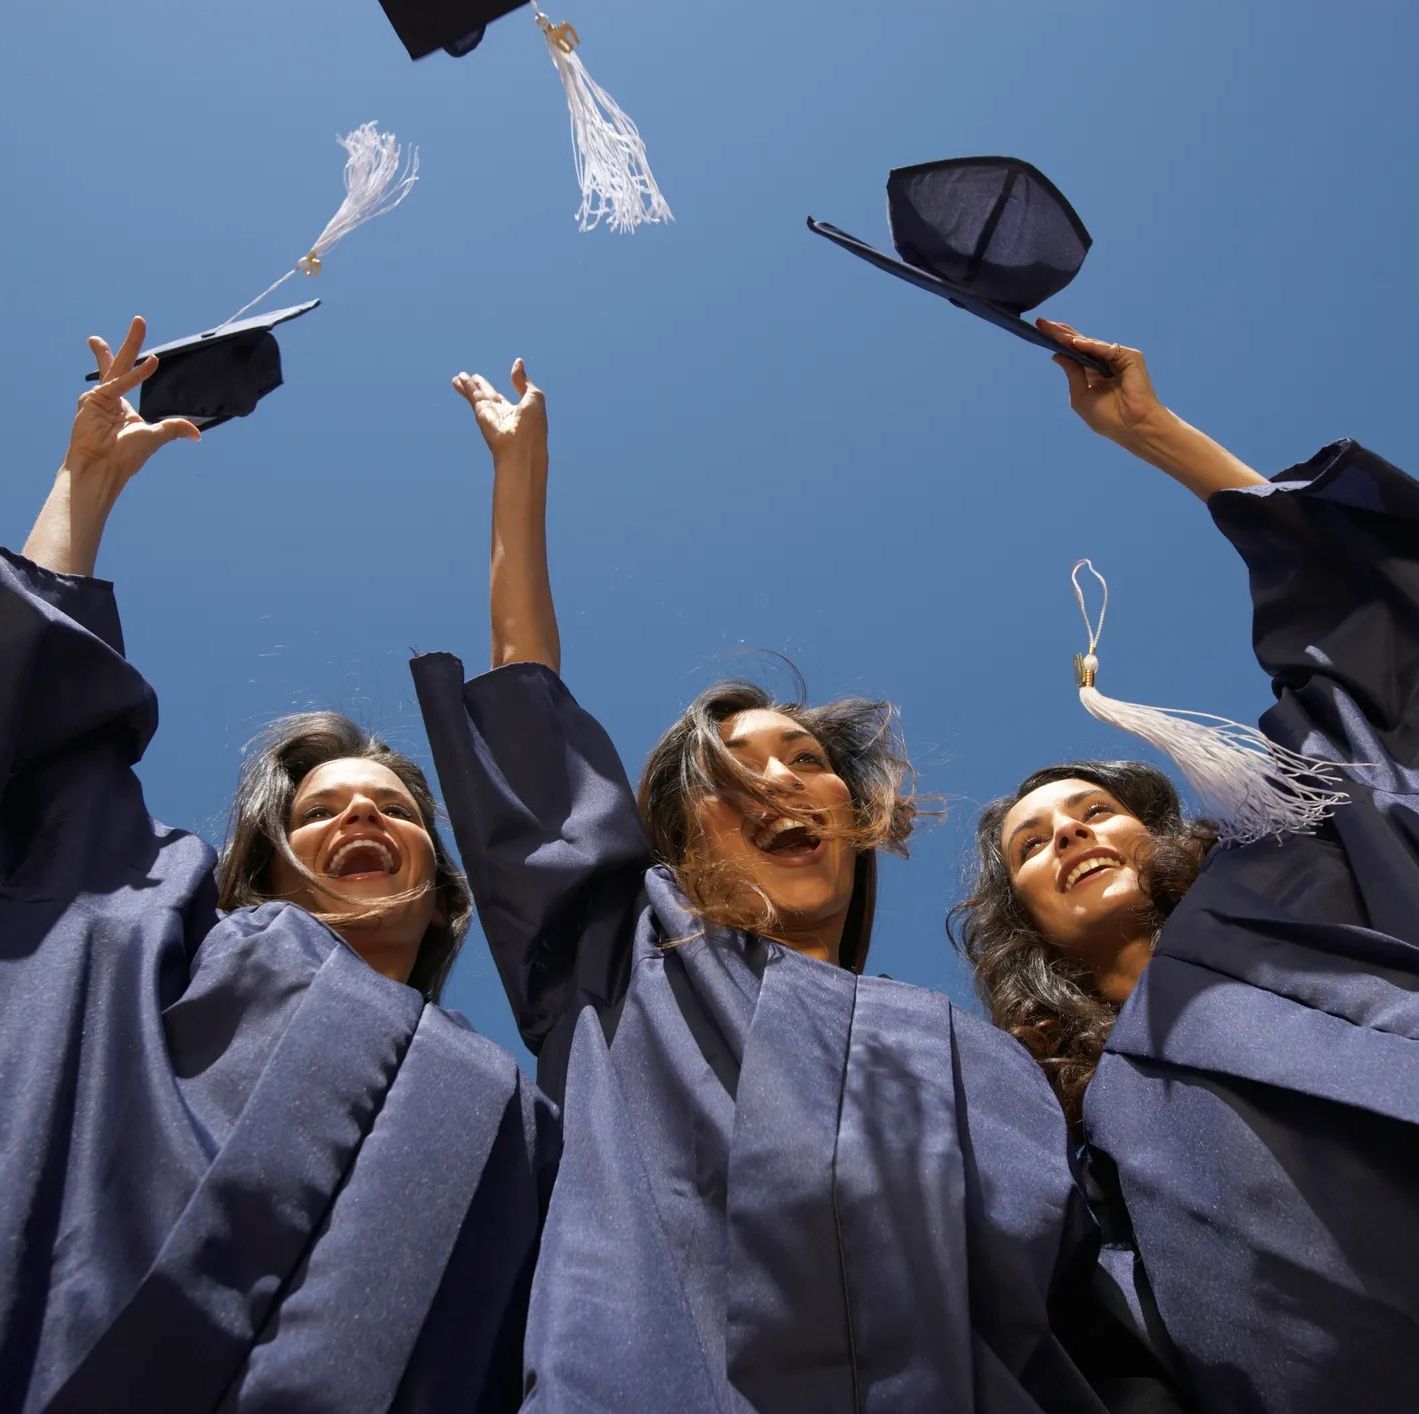 Graduation Season Is Here! What to Write in the Card for Every Grad on Your List